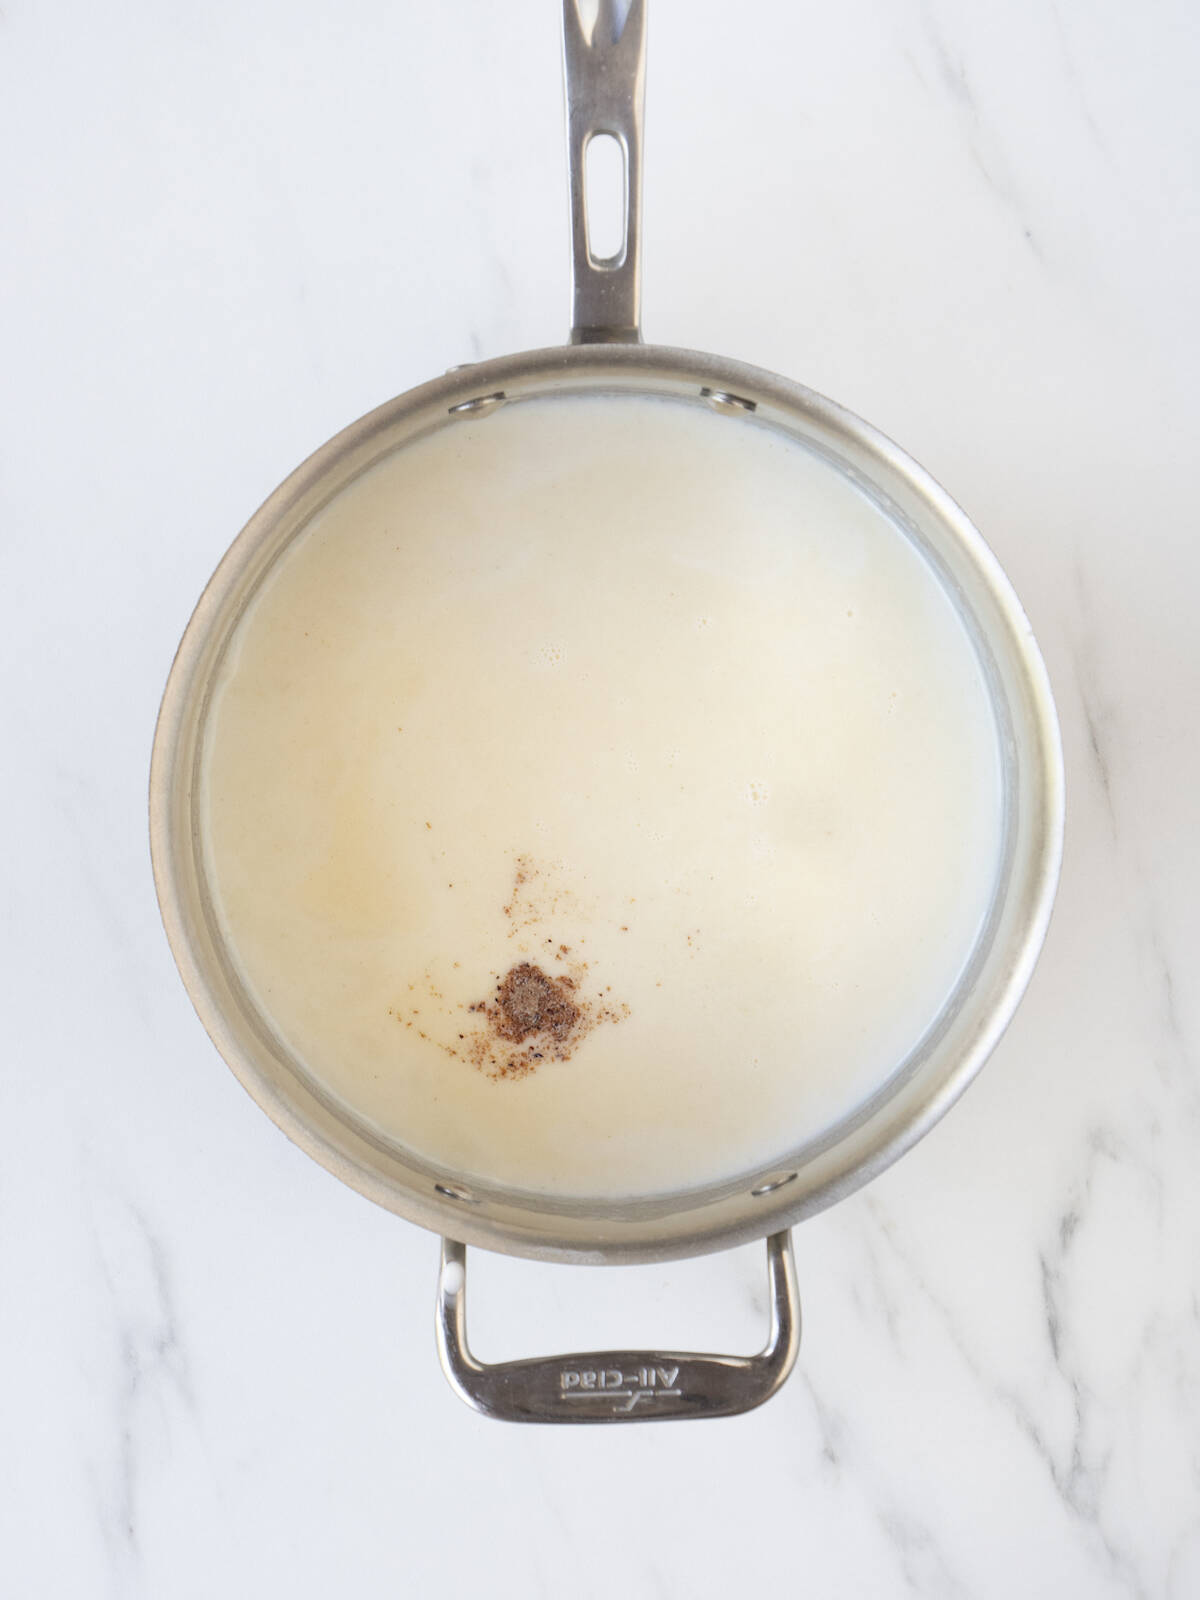 A saucepan with roux to make béchamel sauce with milk just poured in and nutmeg sprinkled on top.